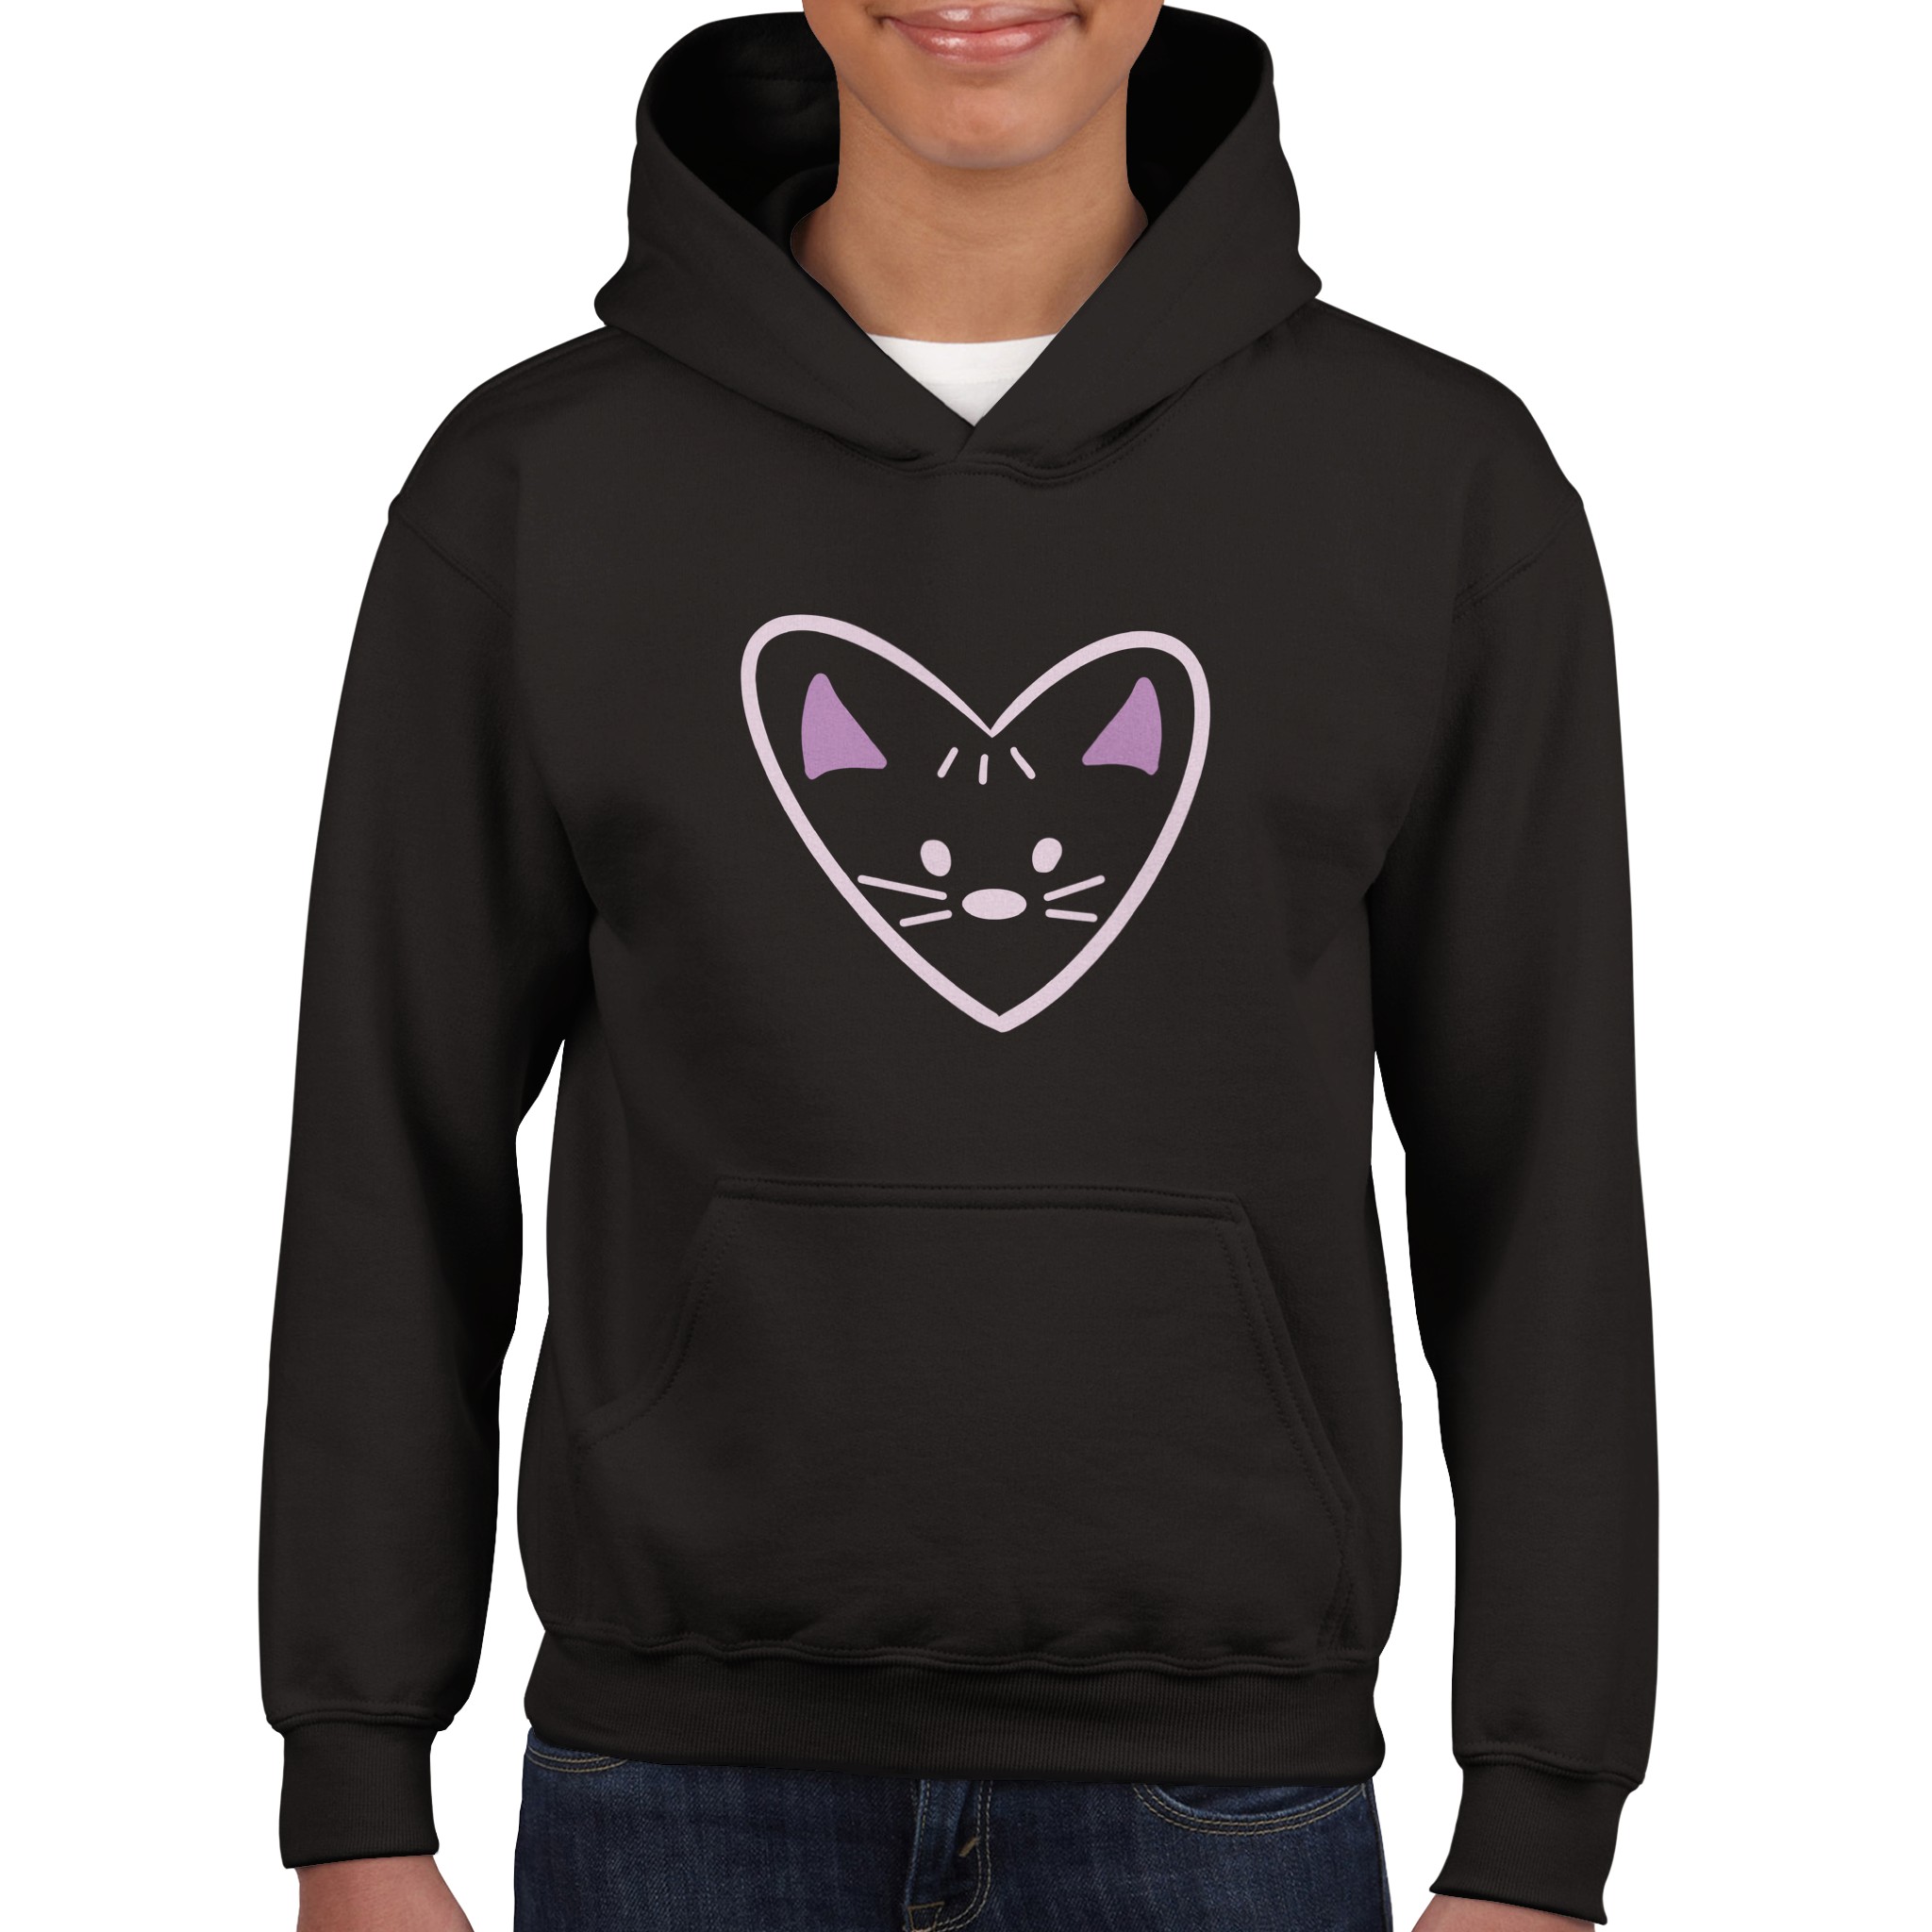 Classic Kids Pullover Hoodie - Cat Heart Face